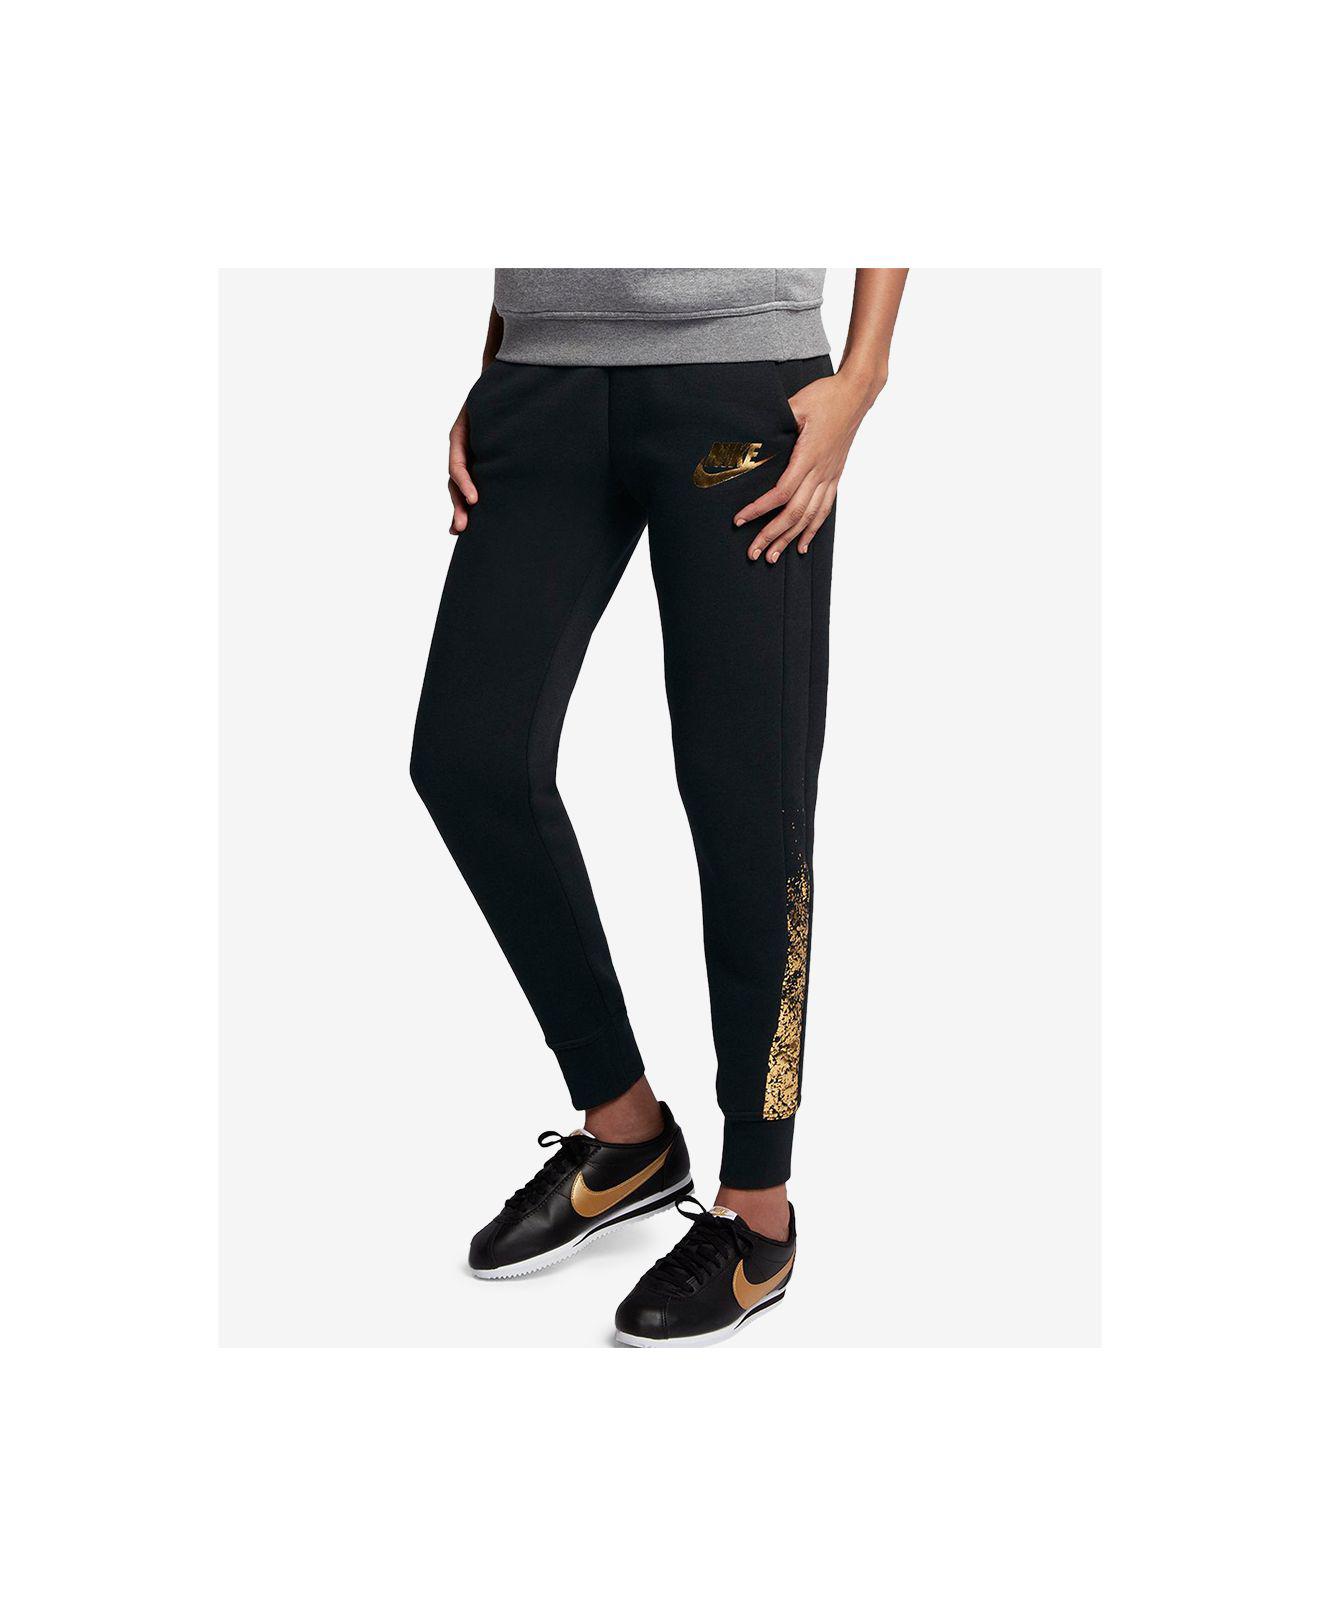 nike gold joggers Sale,up to 37% Discounts